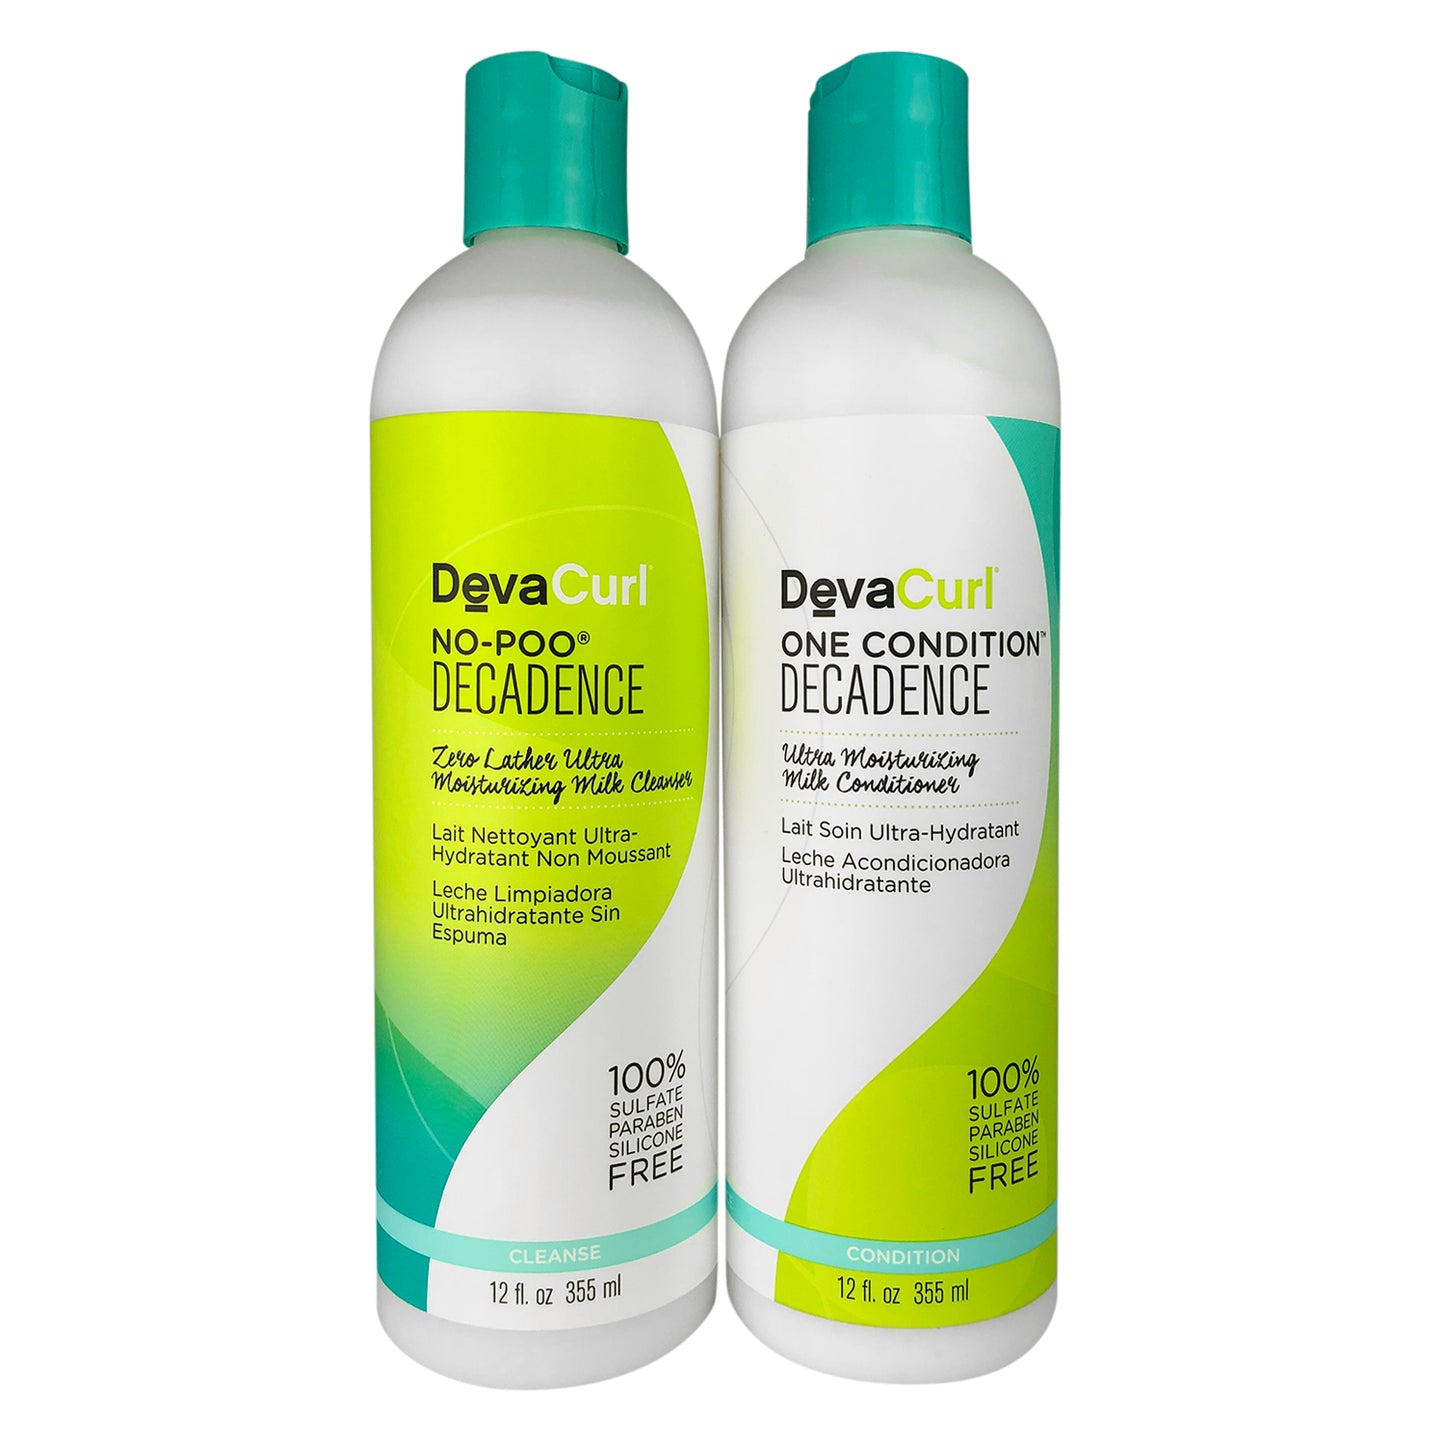 Devacurl No-Poo Decadence And One Condition Decadence 12 oz Each for Hair